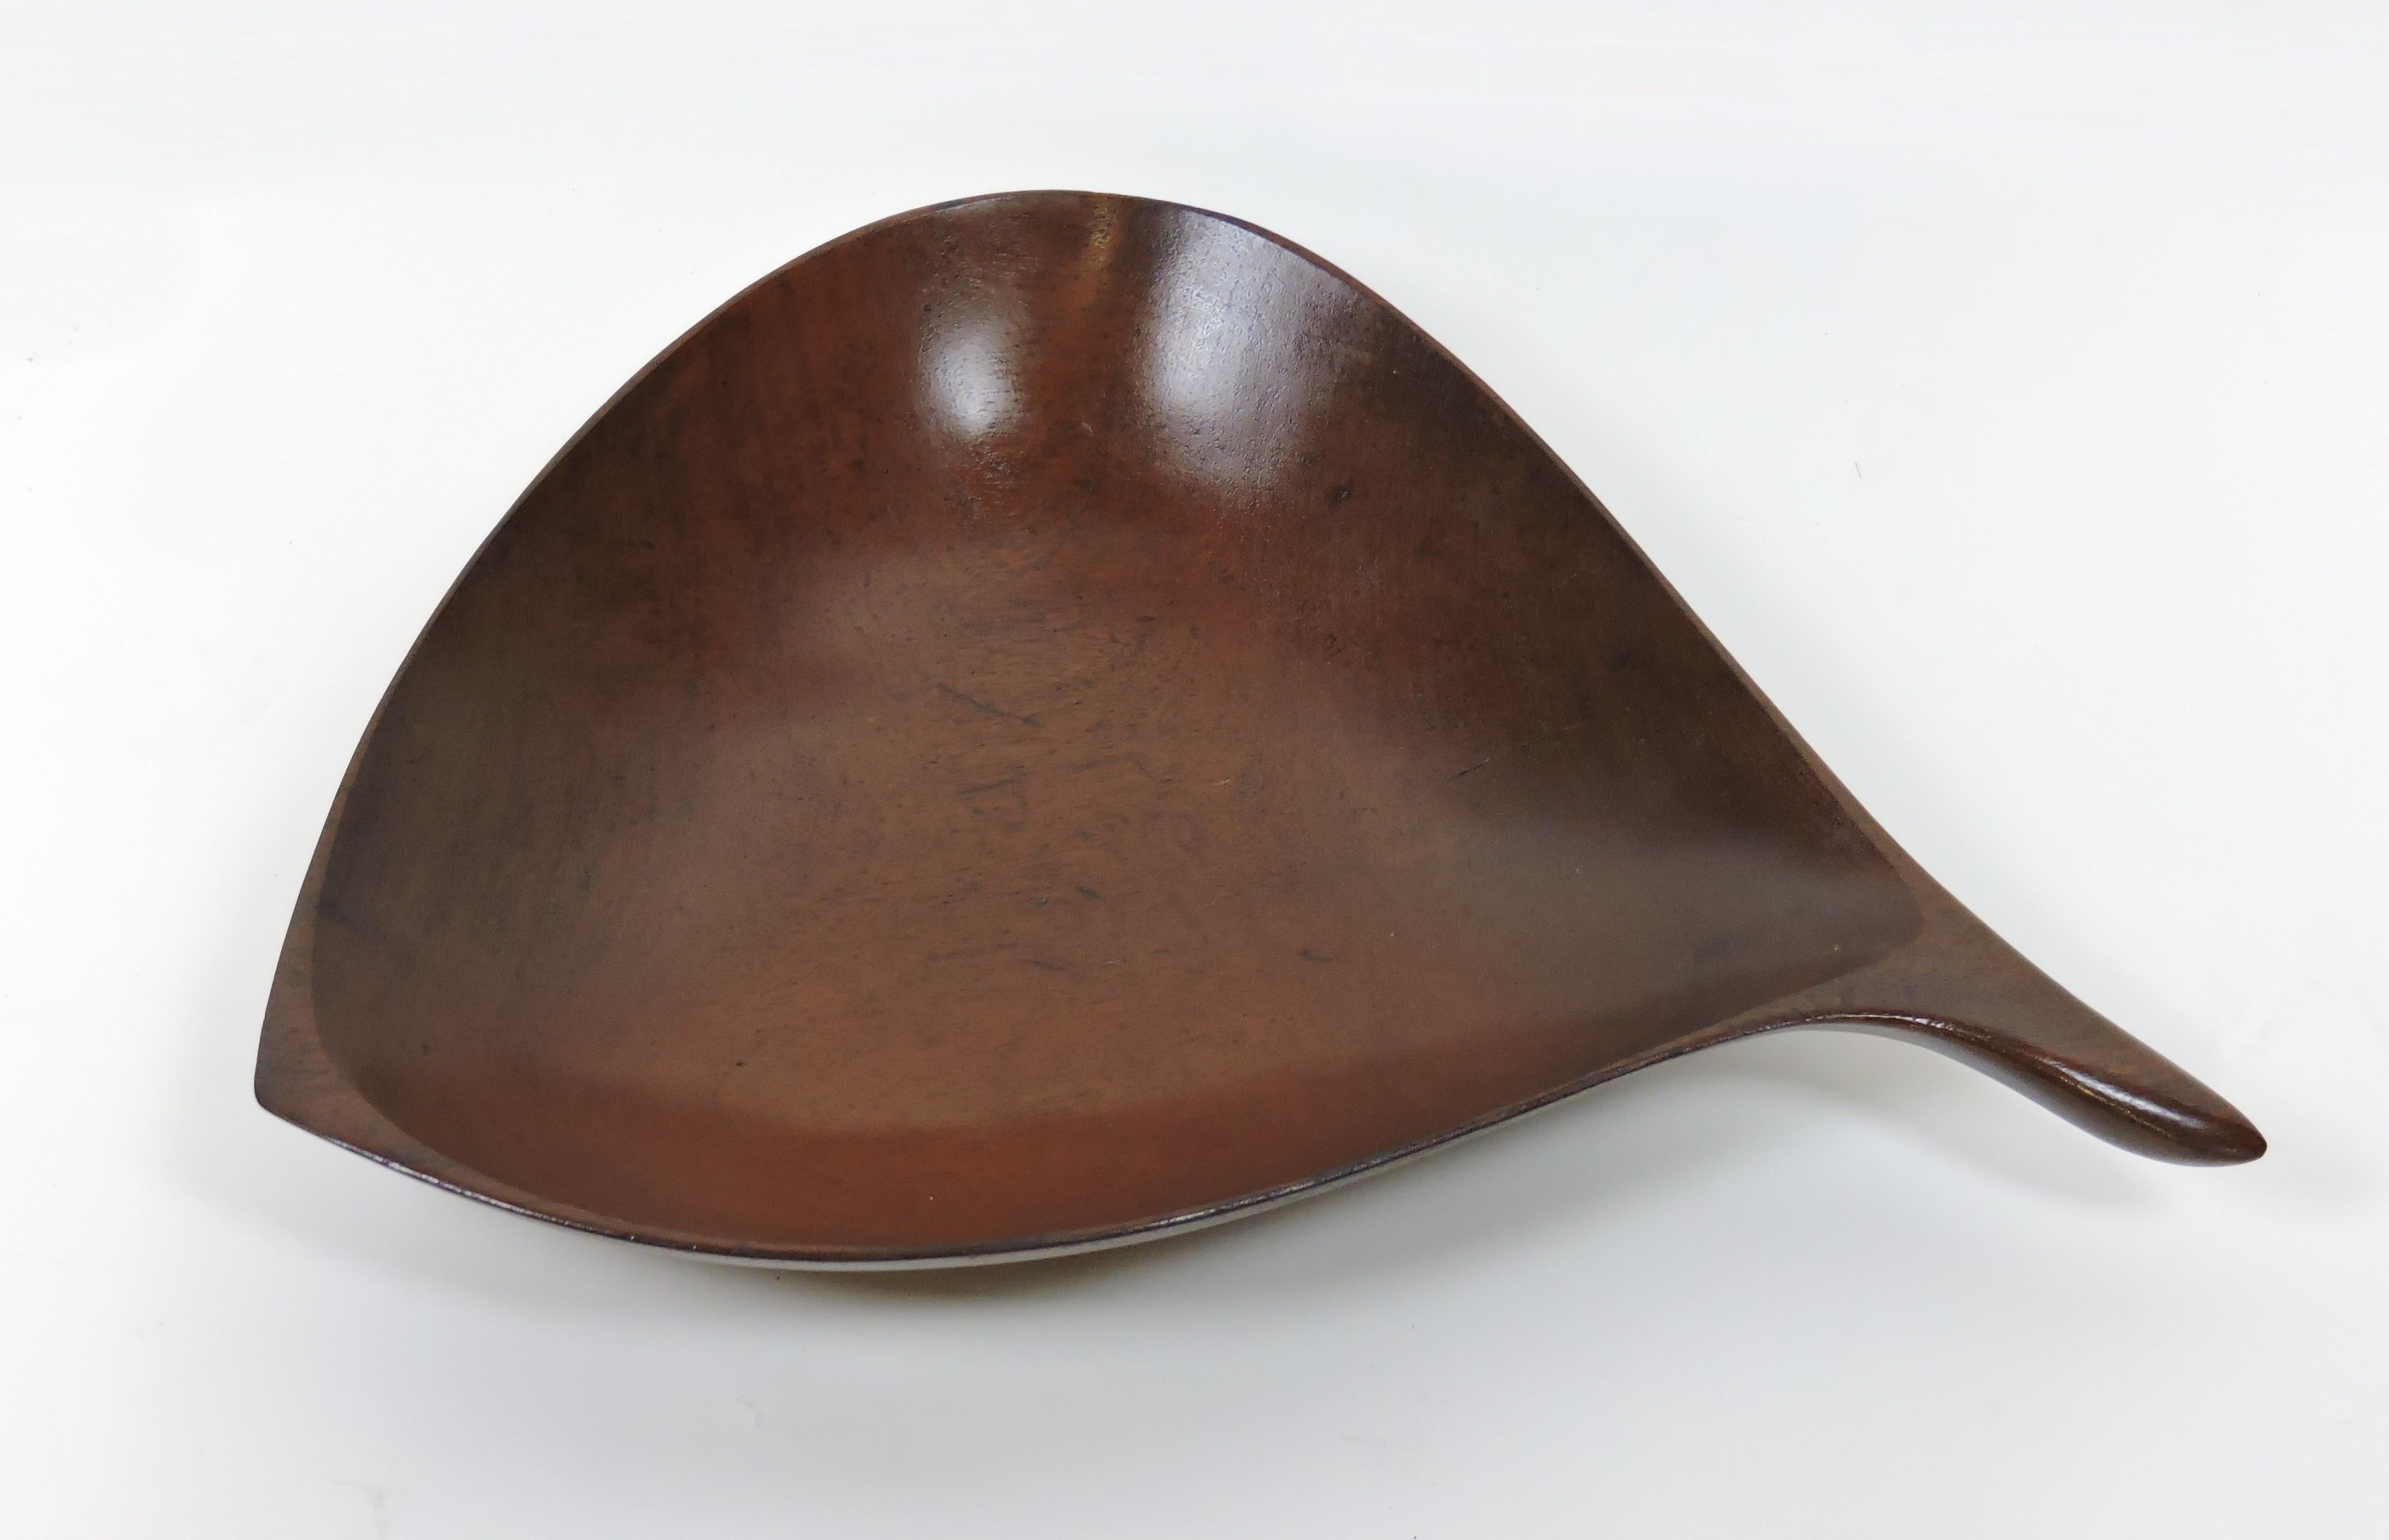 Beautiful and very large sculptural wood bowl by acclaimed American woodworker, Emil Milan. This bowl is hand carved from Bissilon, a dense wood from Africa and has a wonderful free-flowing shape. Engraved signature on the bottom - Emilan, Bissilon.